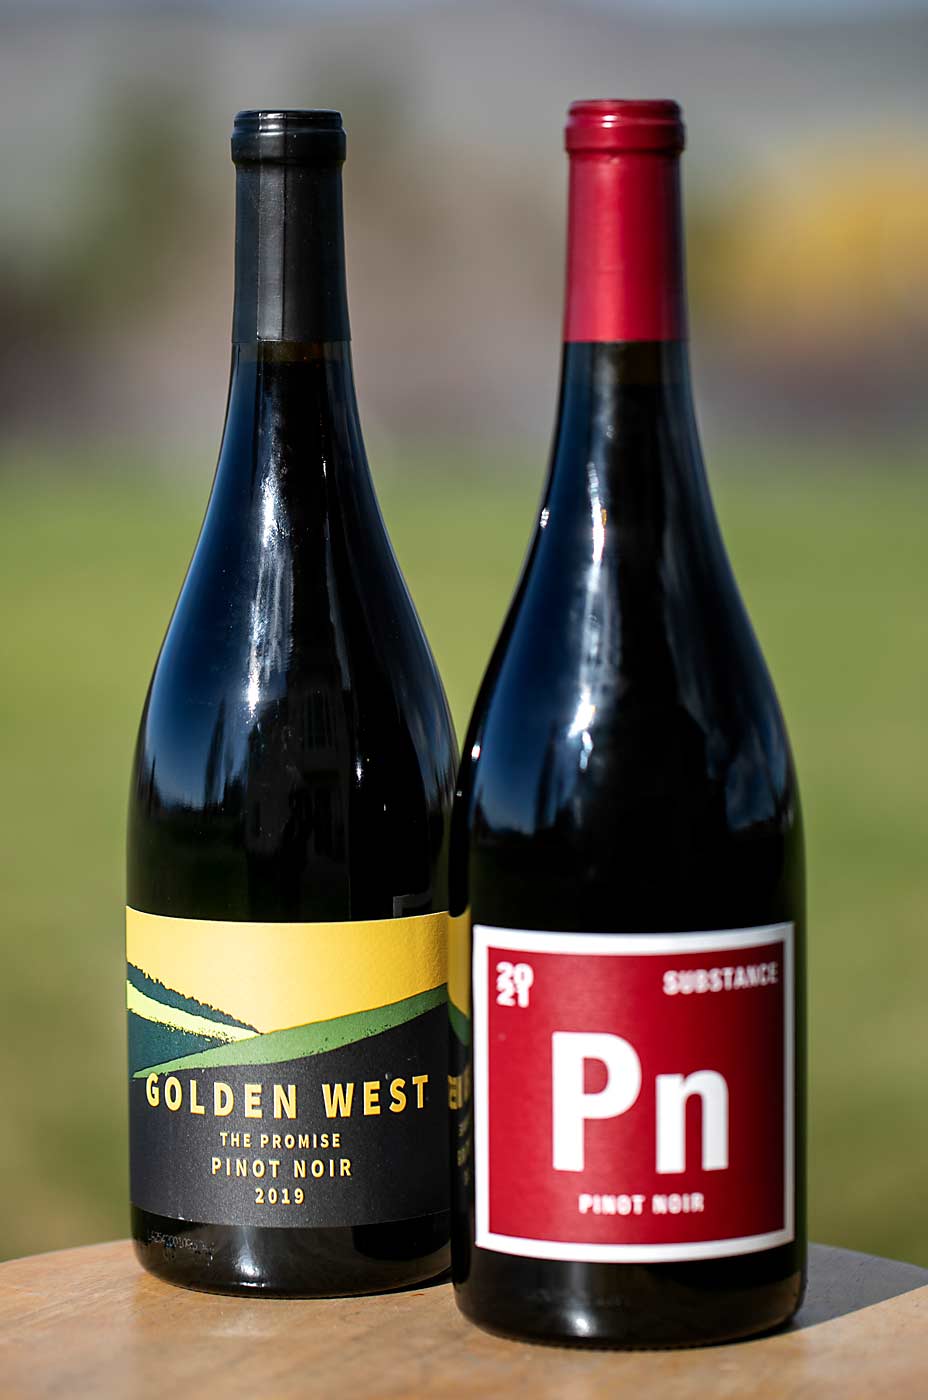 Brown’s Pinot Noir grapes are used in the House of Smith winery’s Substance label. (TJ Mullinax/Good Fruit Grower)